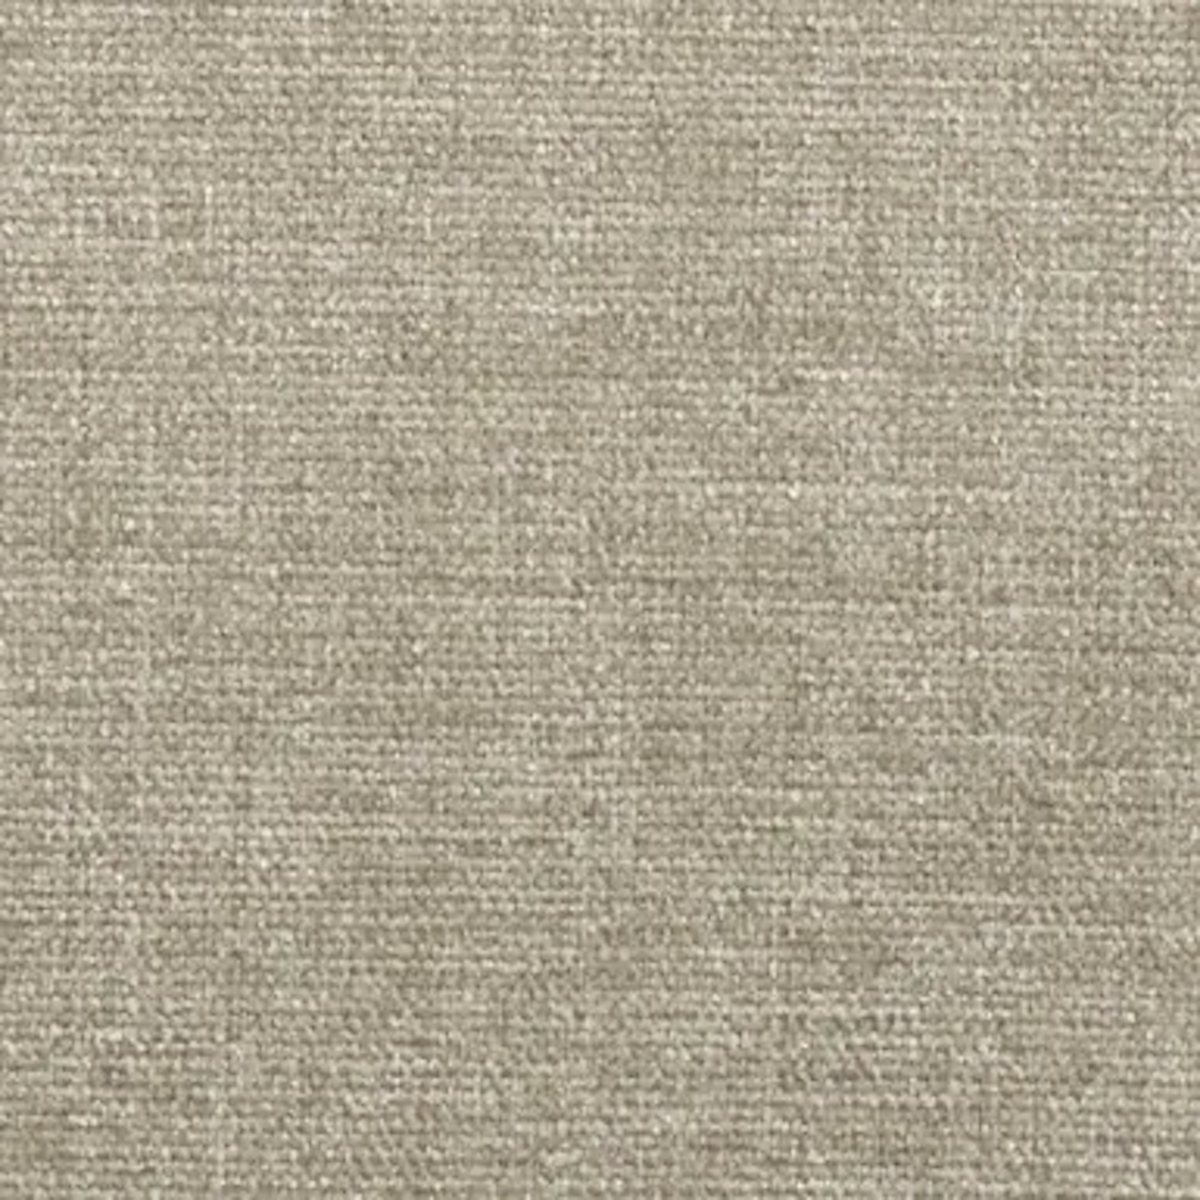 Chenille upholstery textile swatch